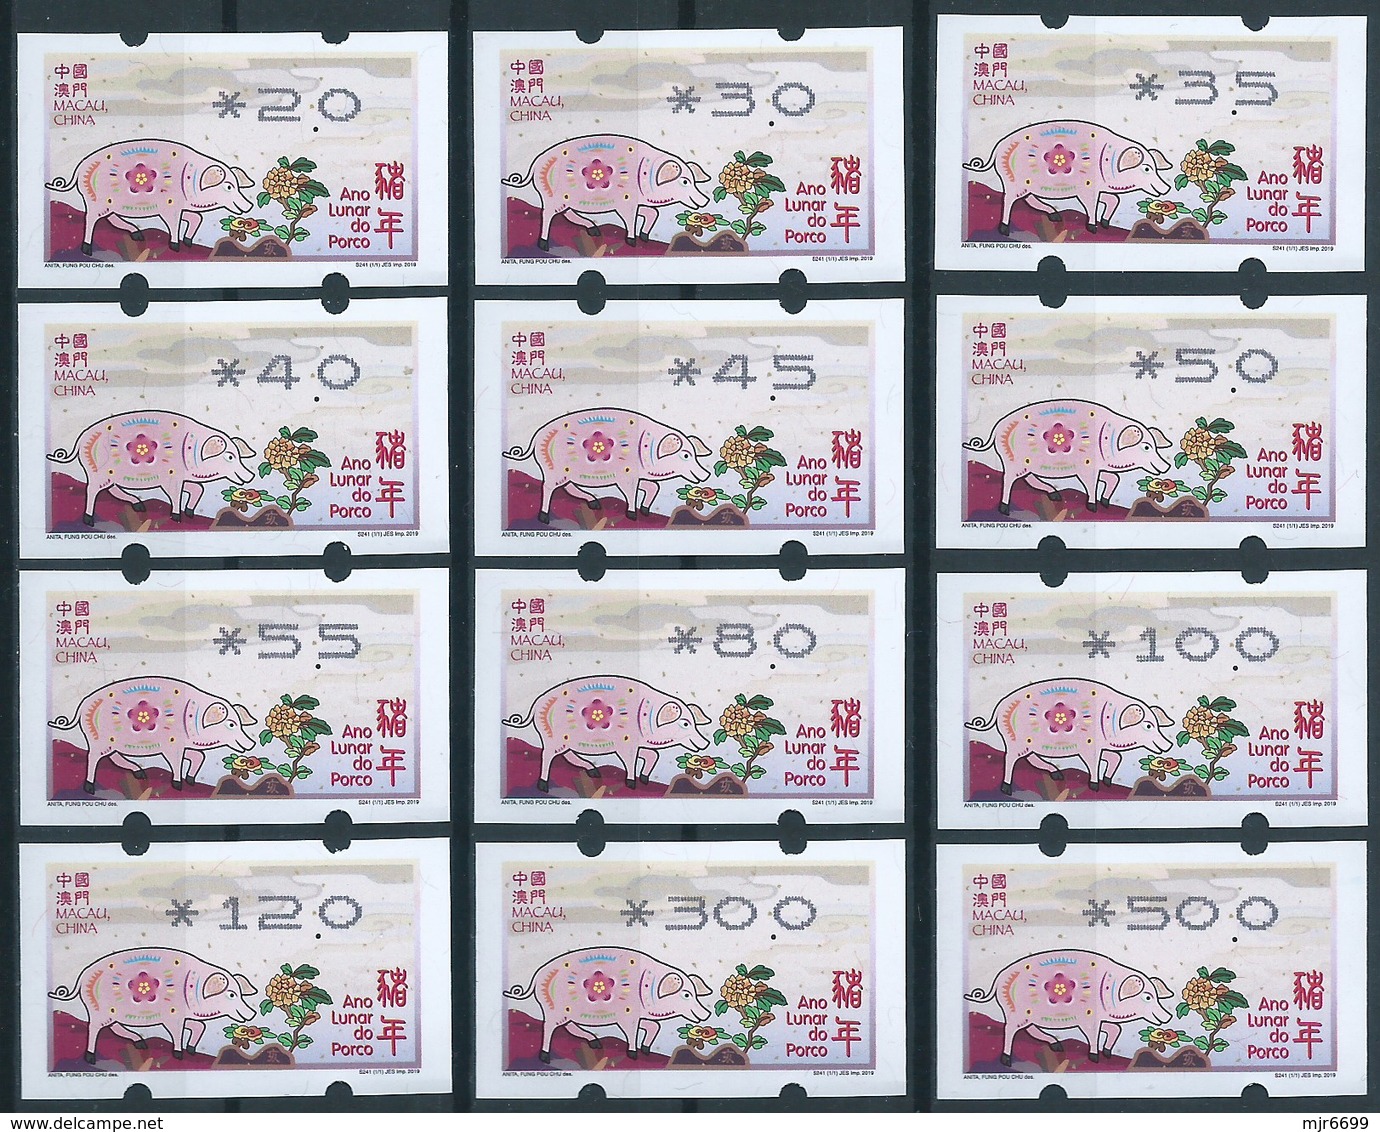 MACAU 2019 ZODIAC YEAR OF THE PIG ATM LABELS "NEW VISION" COMPLETE LARGE SET OF 12 VALUES - - Distributeurs